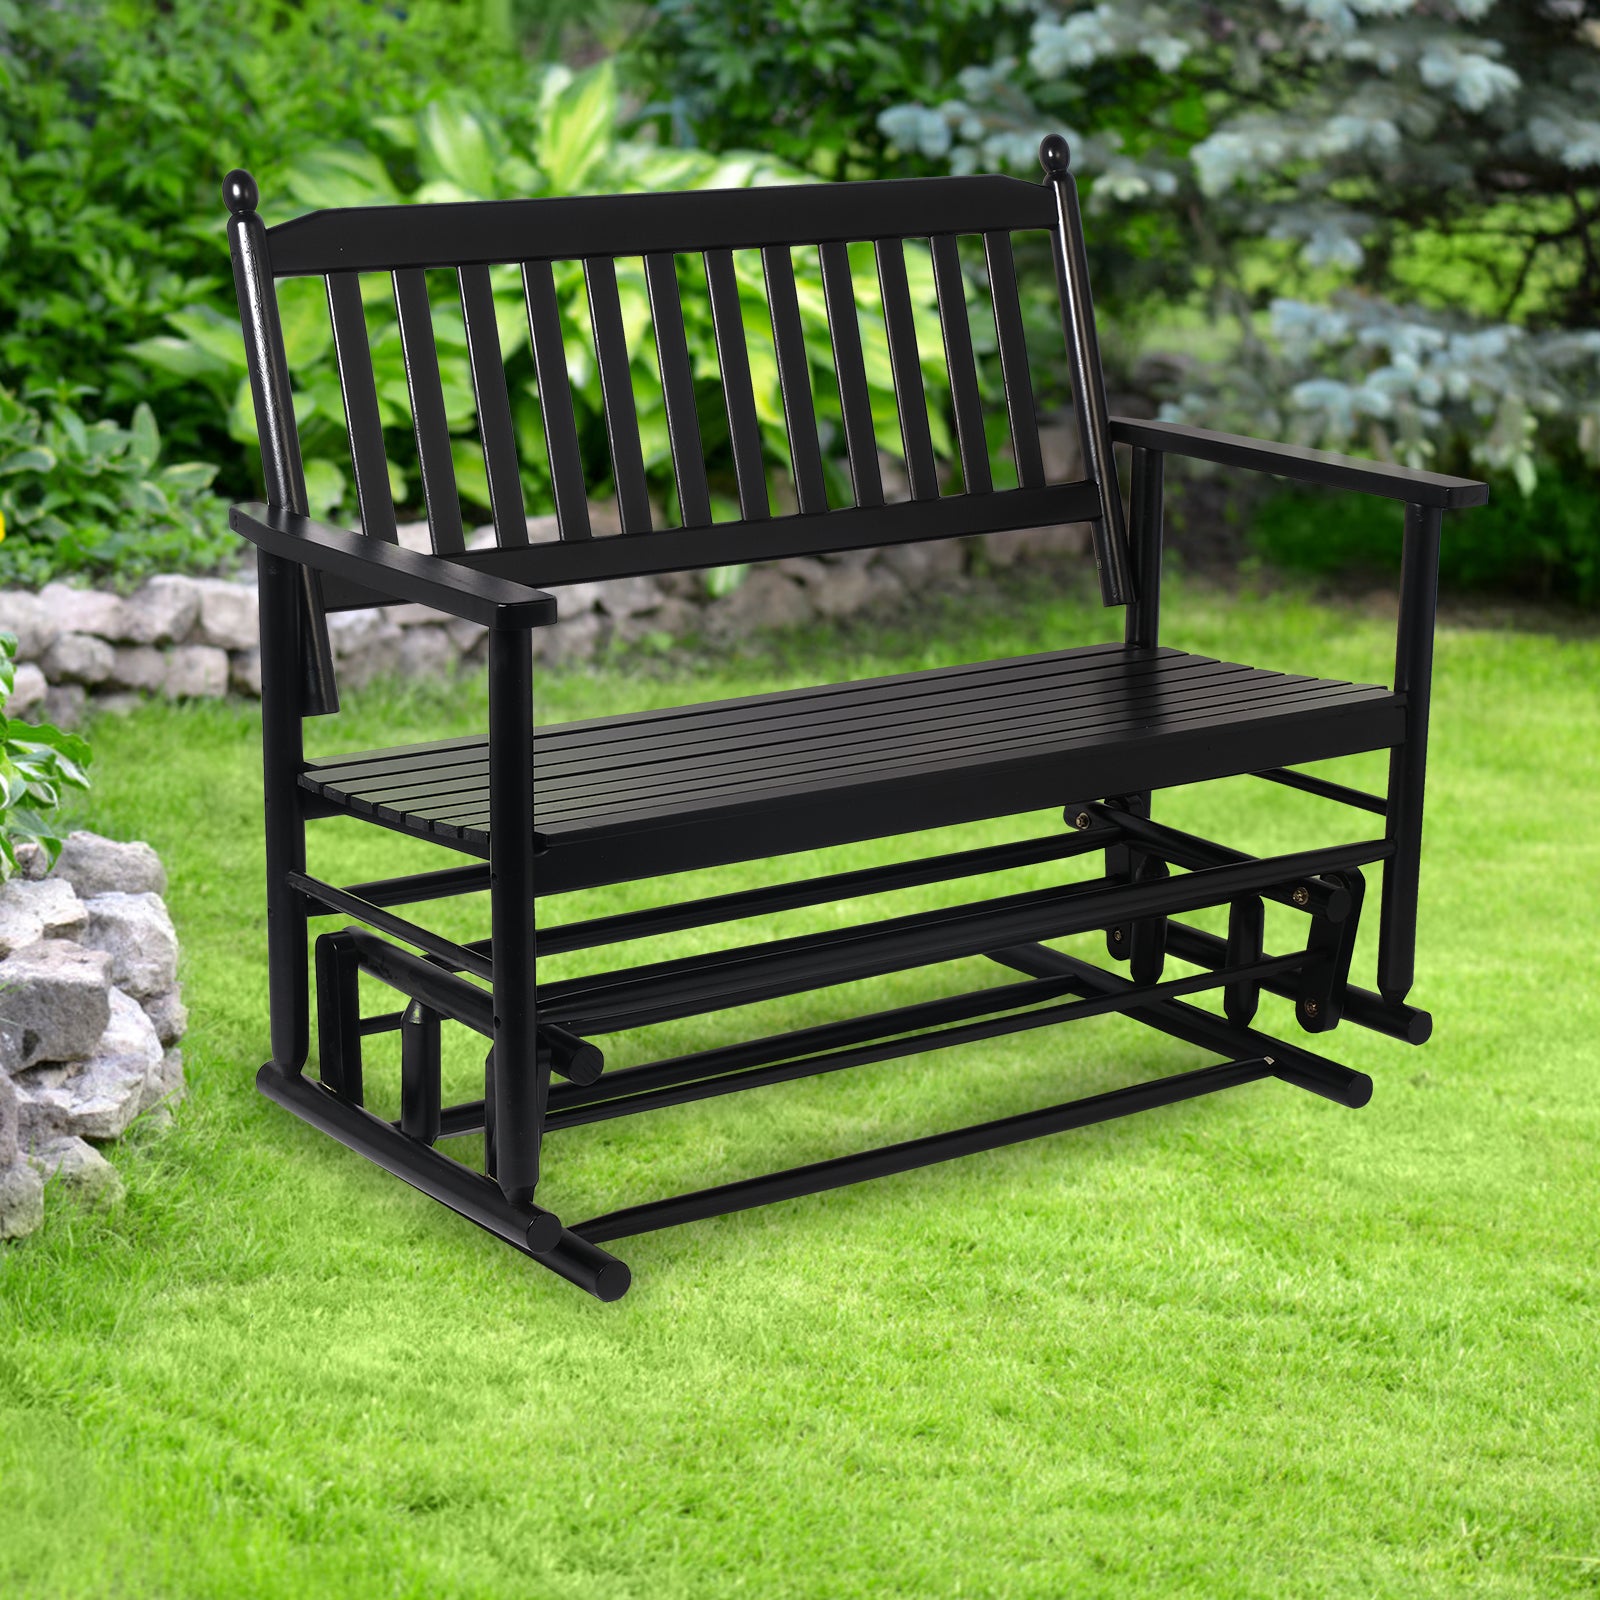 Outdoor Patio Swing Glider Bench 2-Person Wooden Rocking Bench Outdoor Seating Chairs, Black